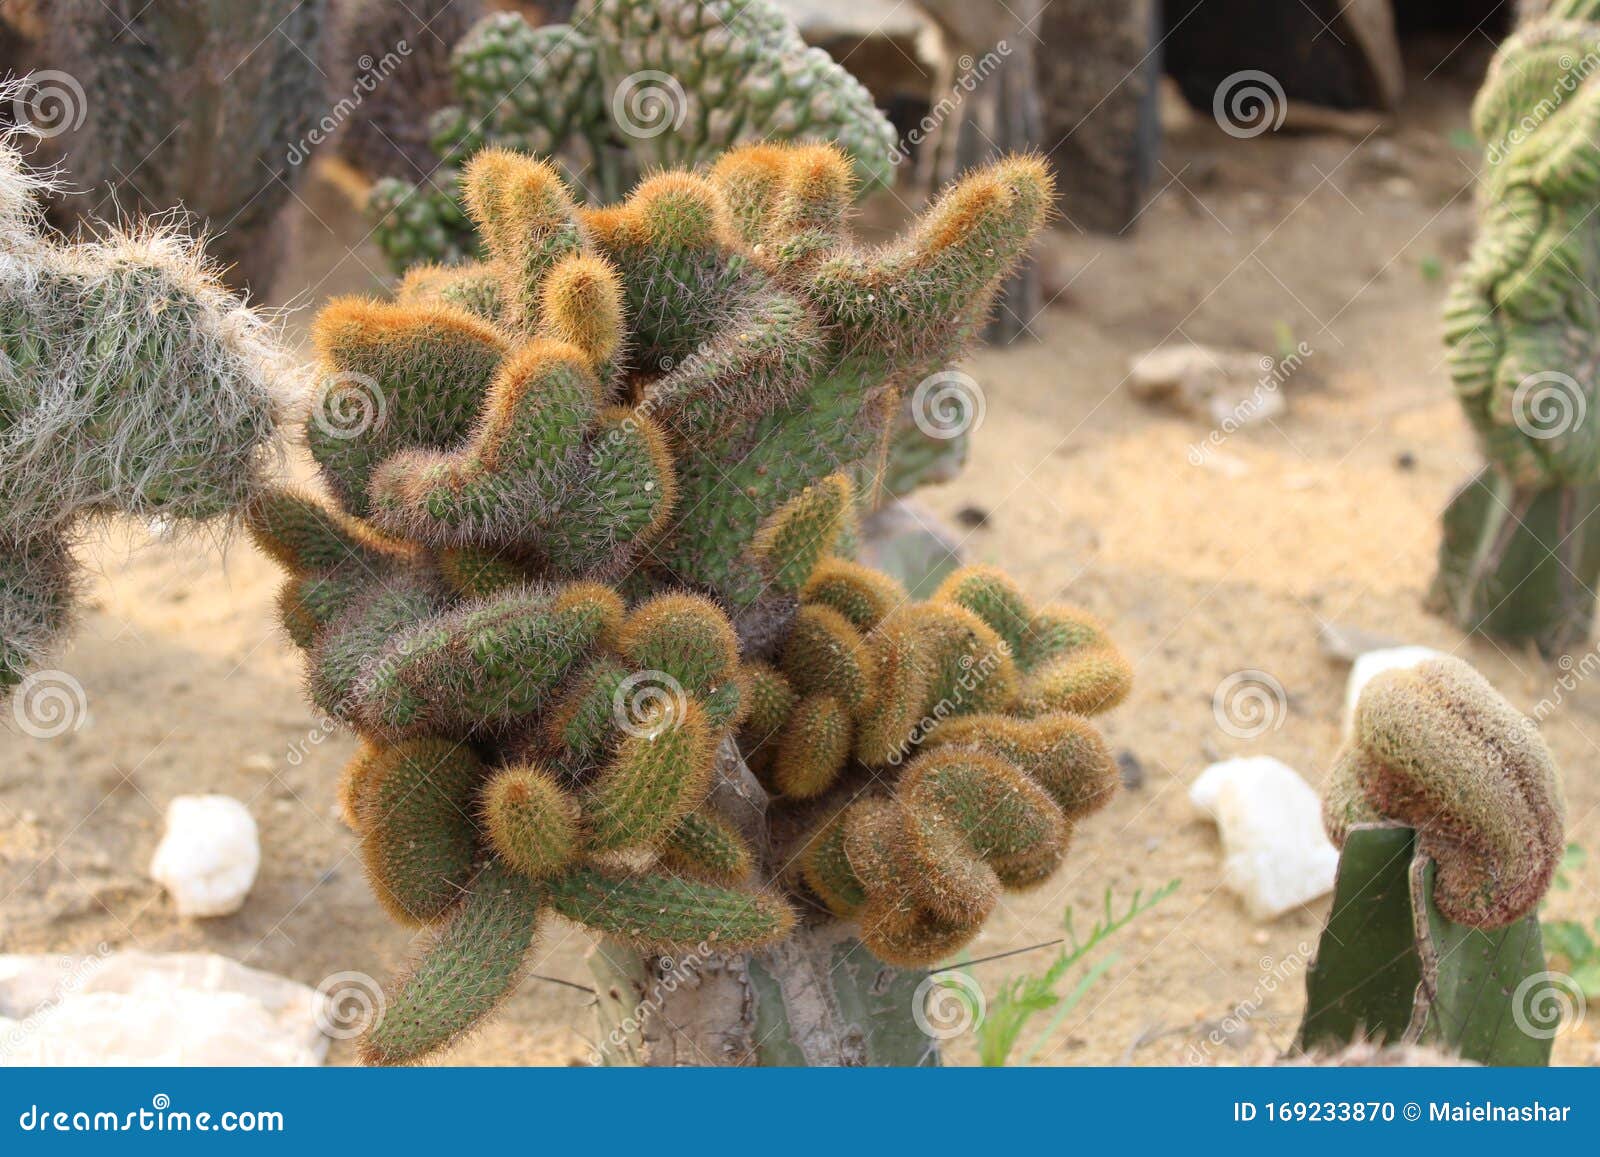 group of hairy spiny old man cactus.